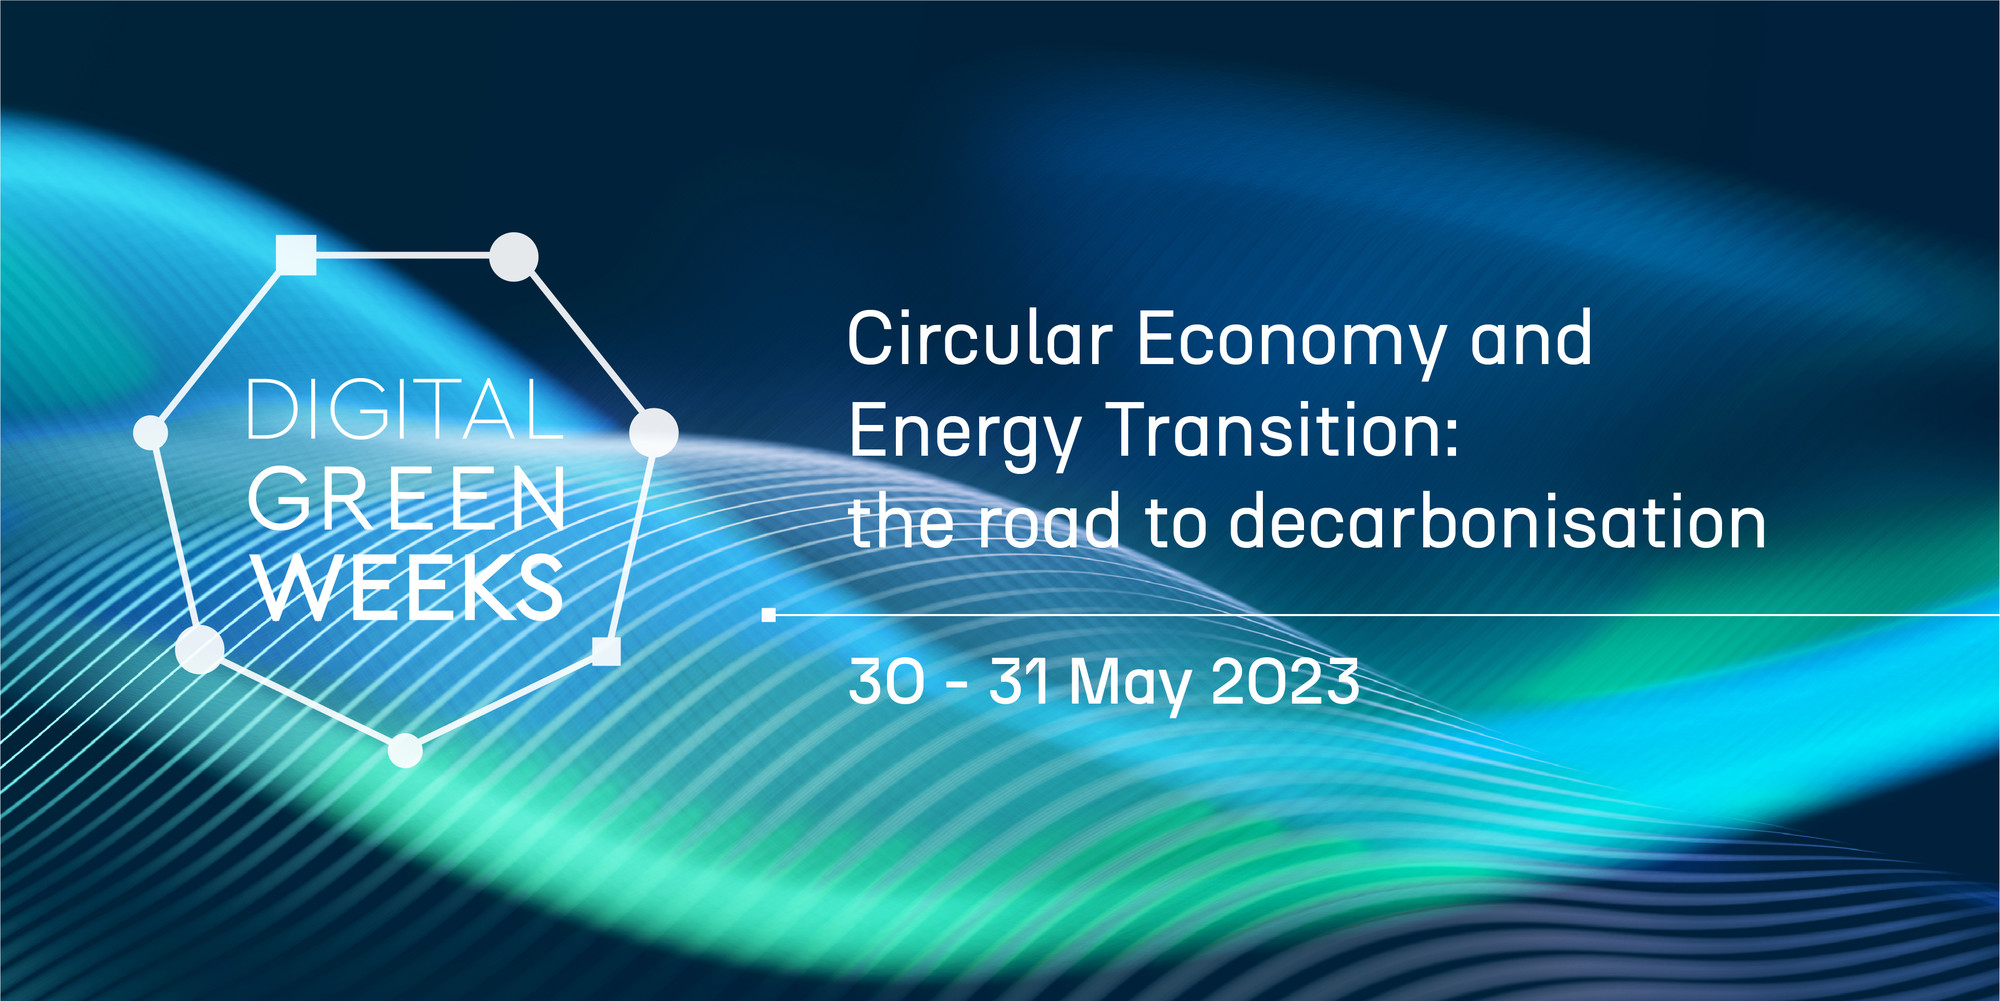 Digital Green Week - Circular Economy and Energy Transition: the road to decarbonisation